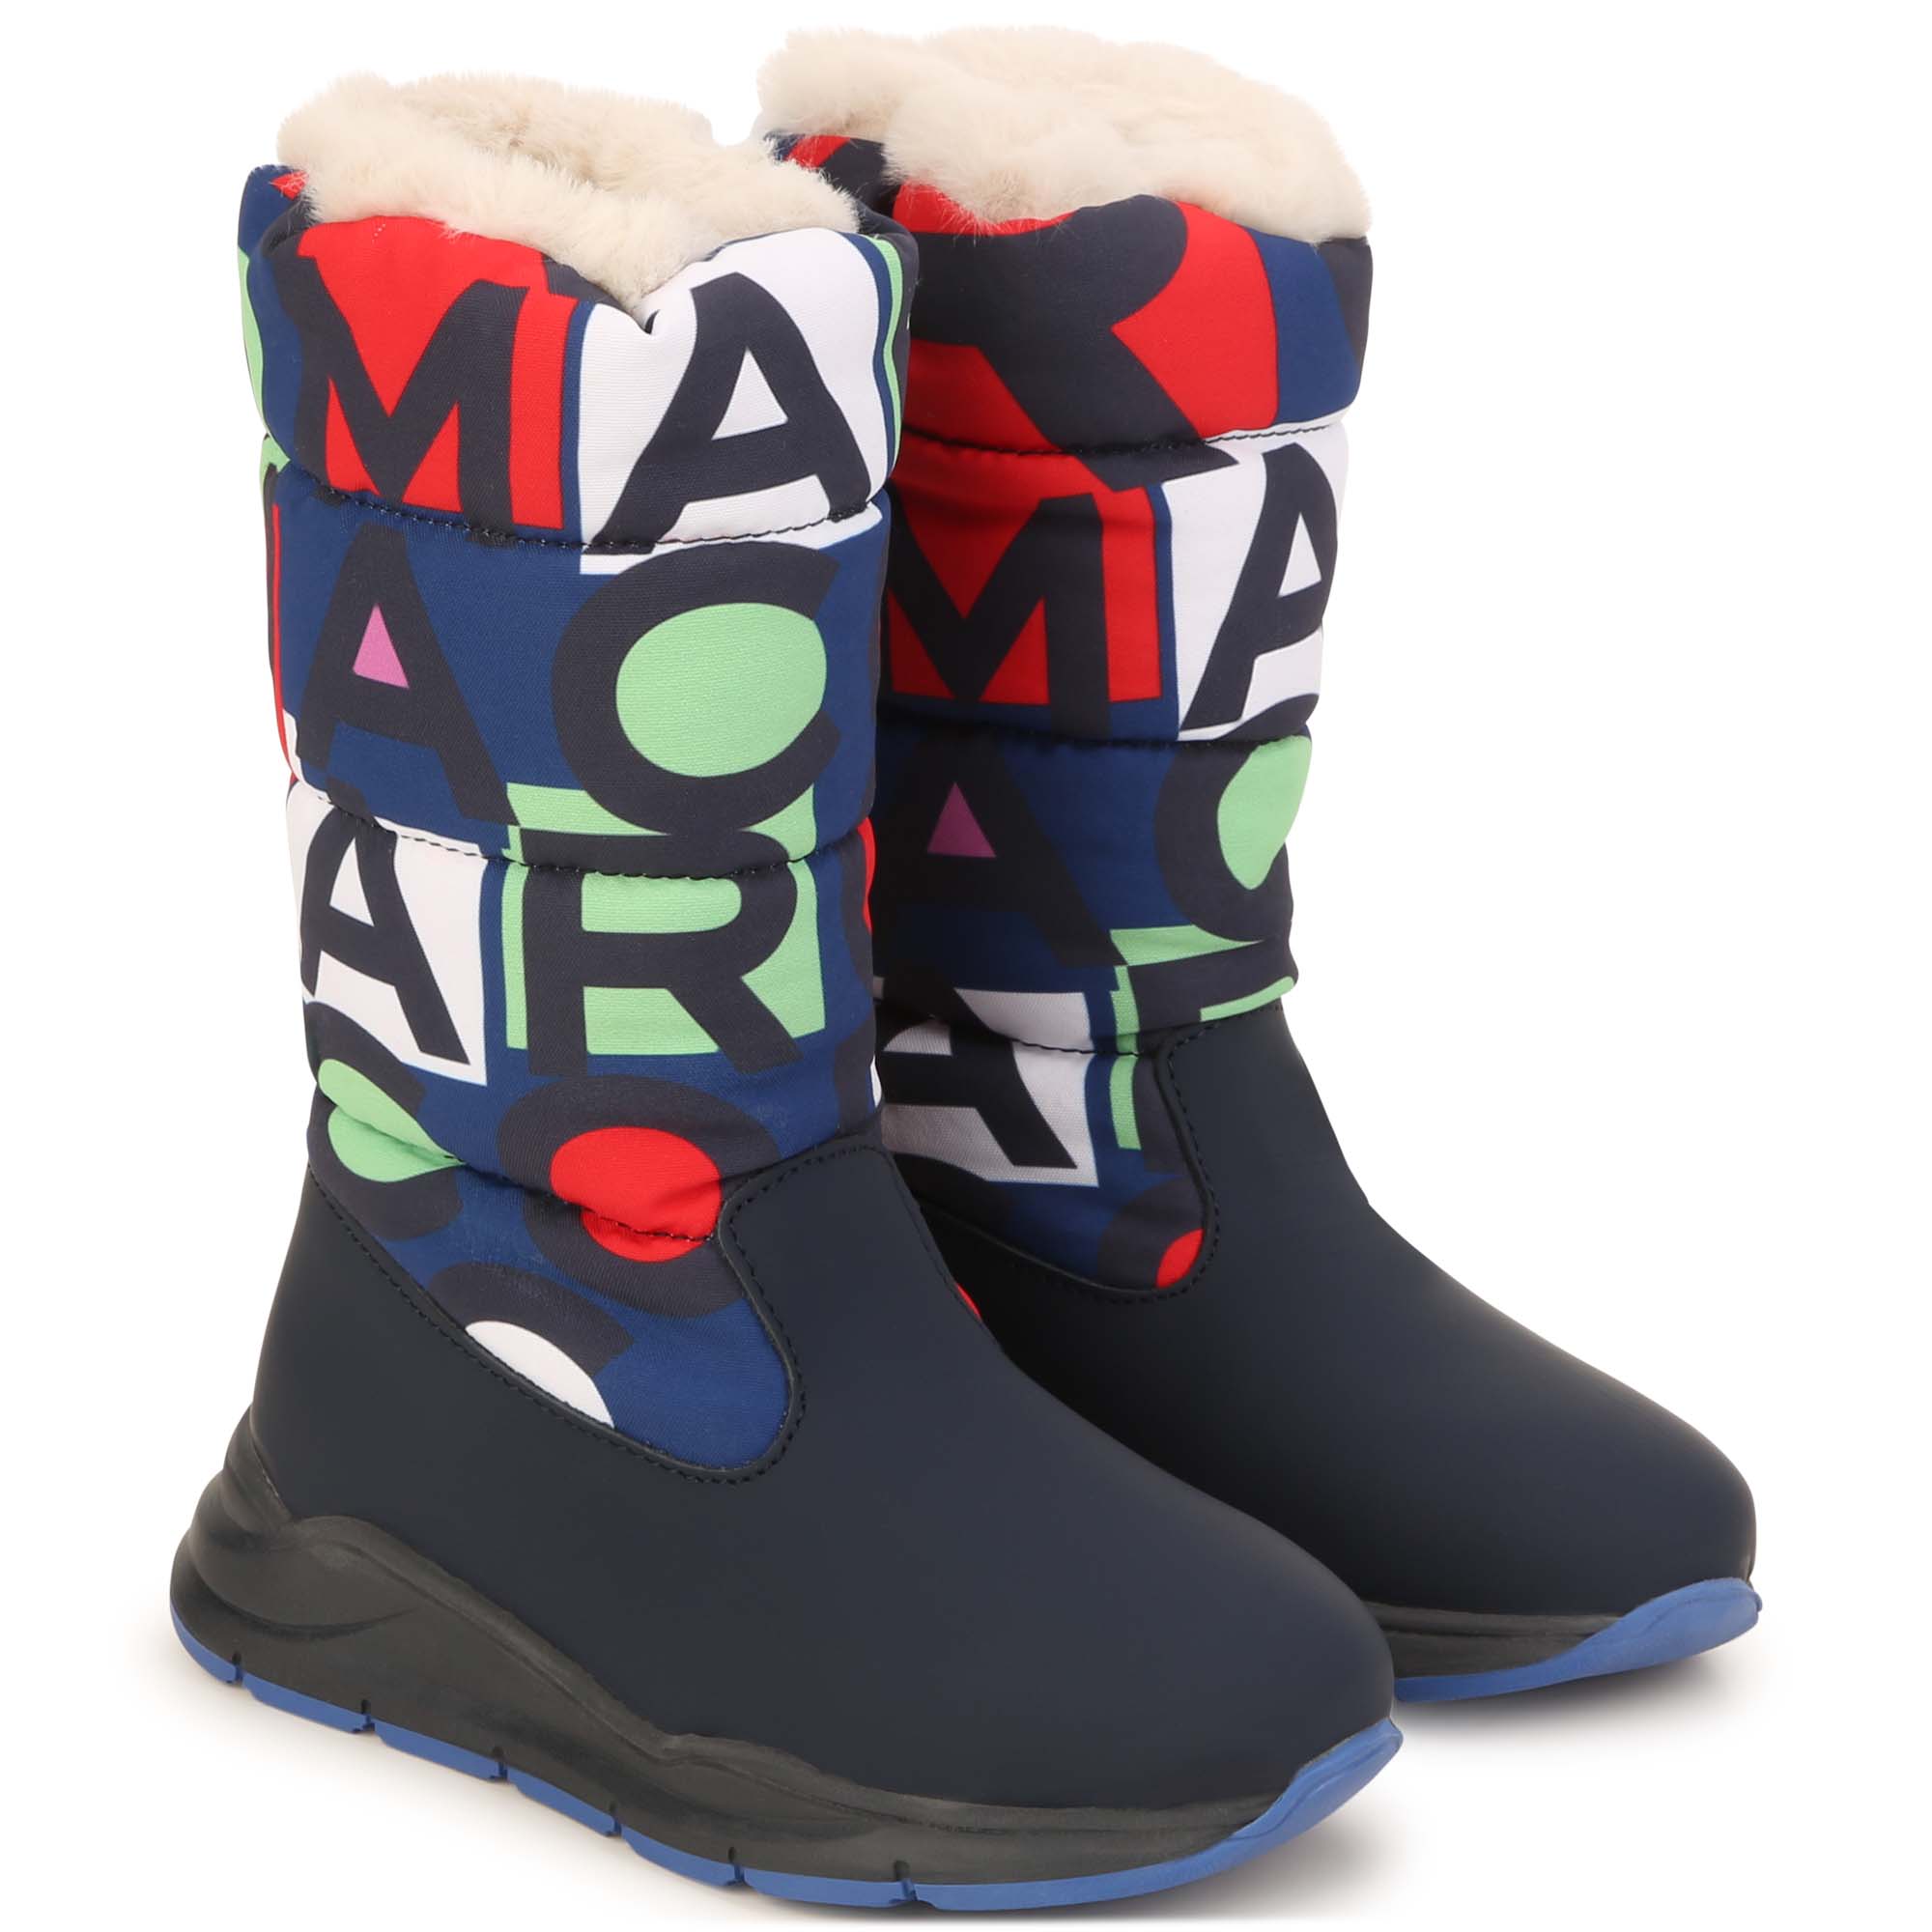 Moonboots MARC JACOBS for BOY